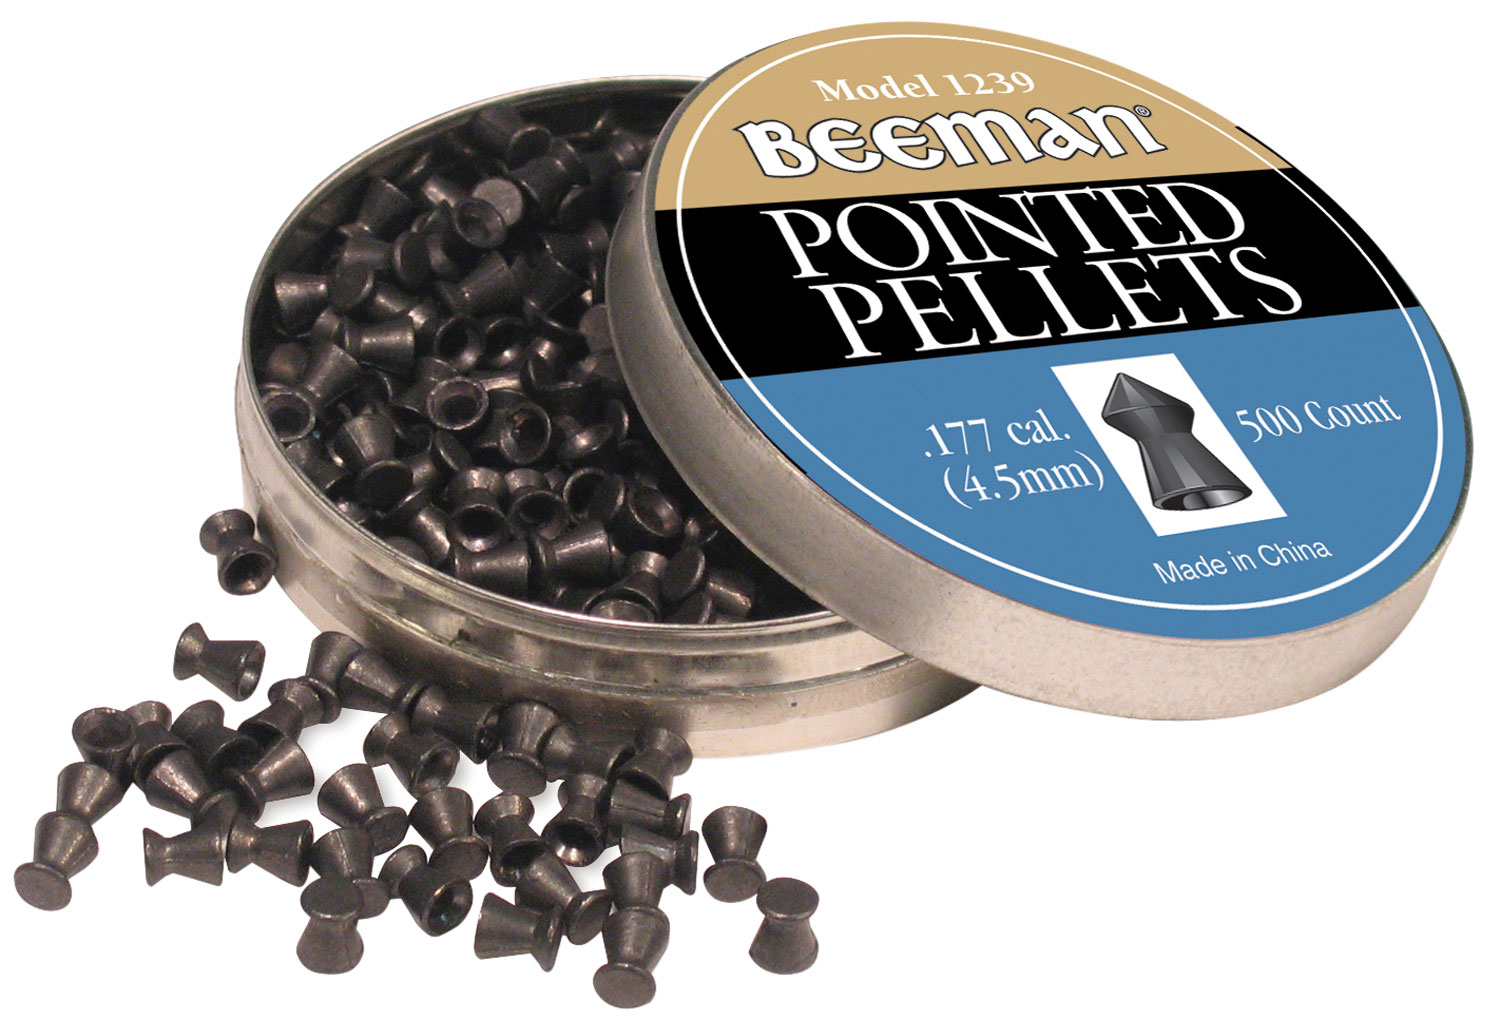 Marksman 1239 Pointed Pellets 500 Ct 0.177  | .177 | 026785012397